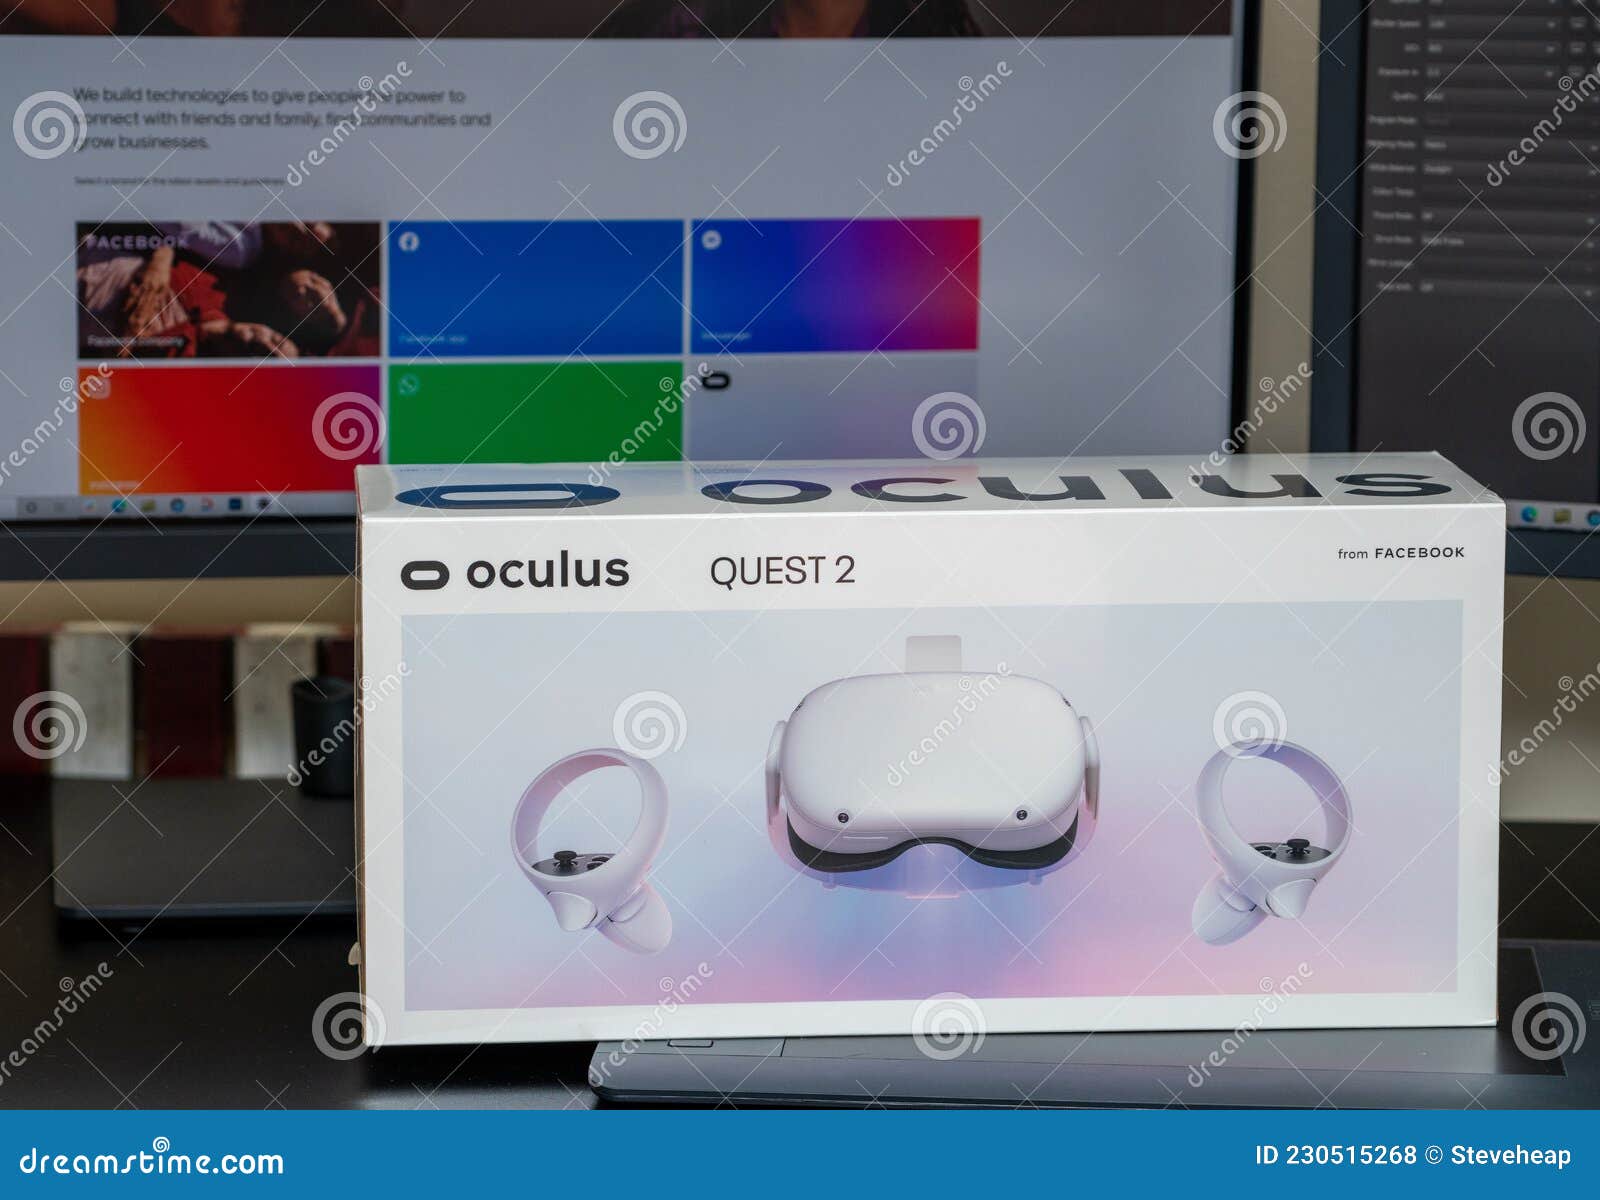 New Oculus Quest 2 128GB VR Headset in Box from Facebook Editorial 